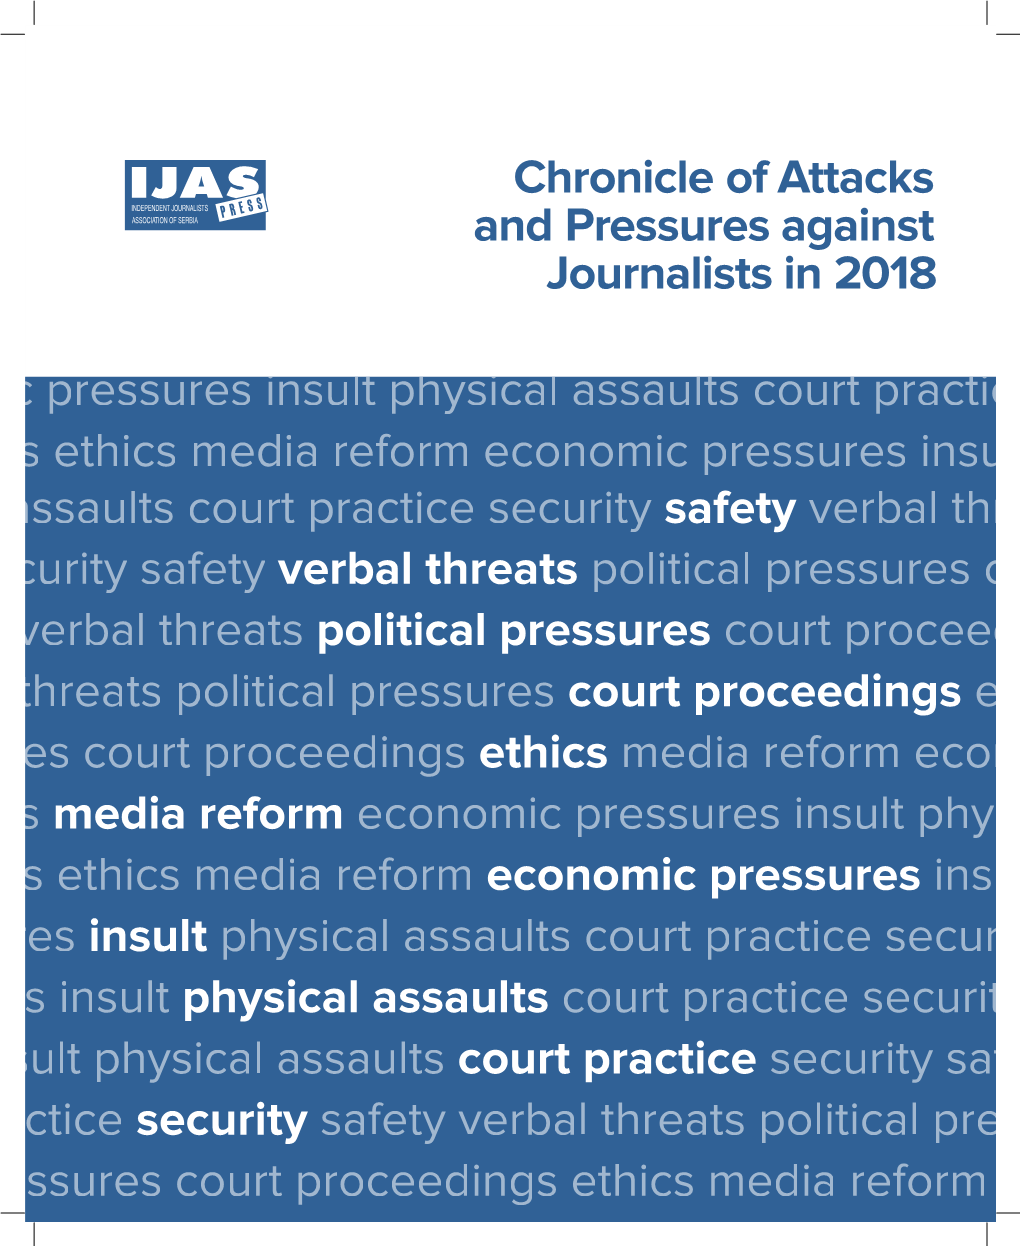 Chronicle of Attacks and Pressures Against Journalists in 2018